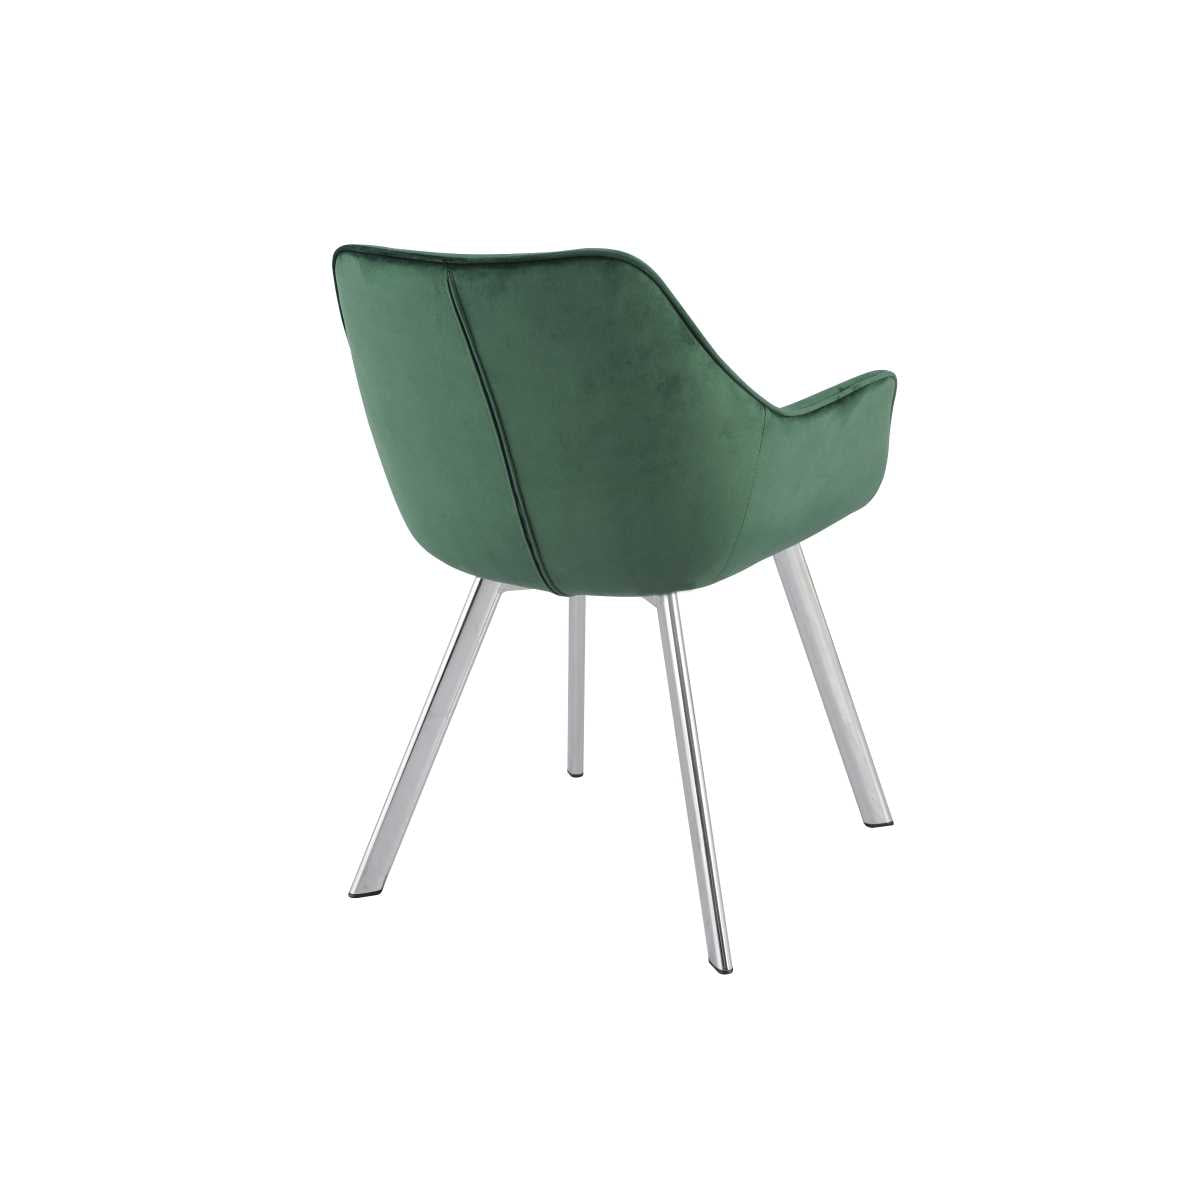 Ayami Chairs Set Of 2 Green With Chrome Legs 1322